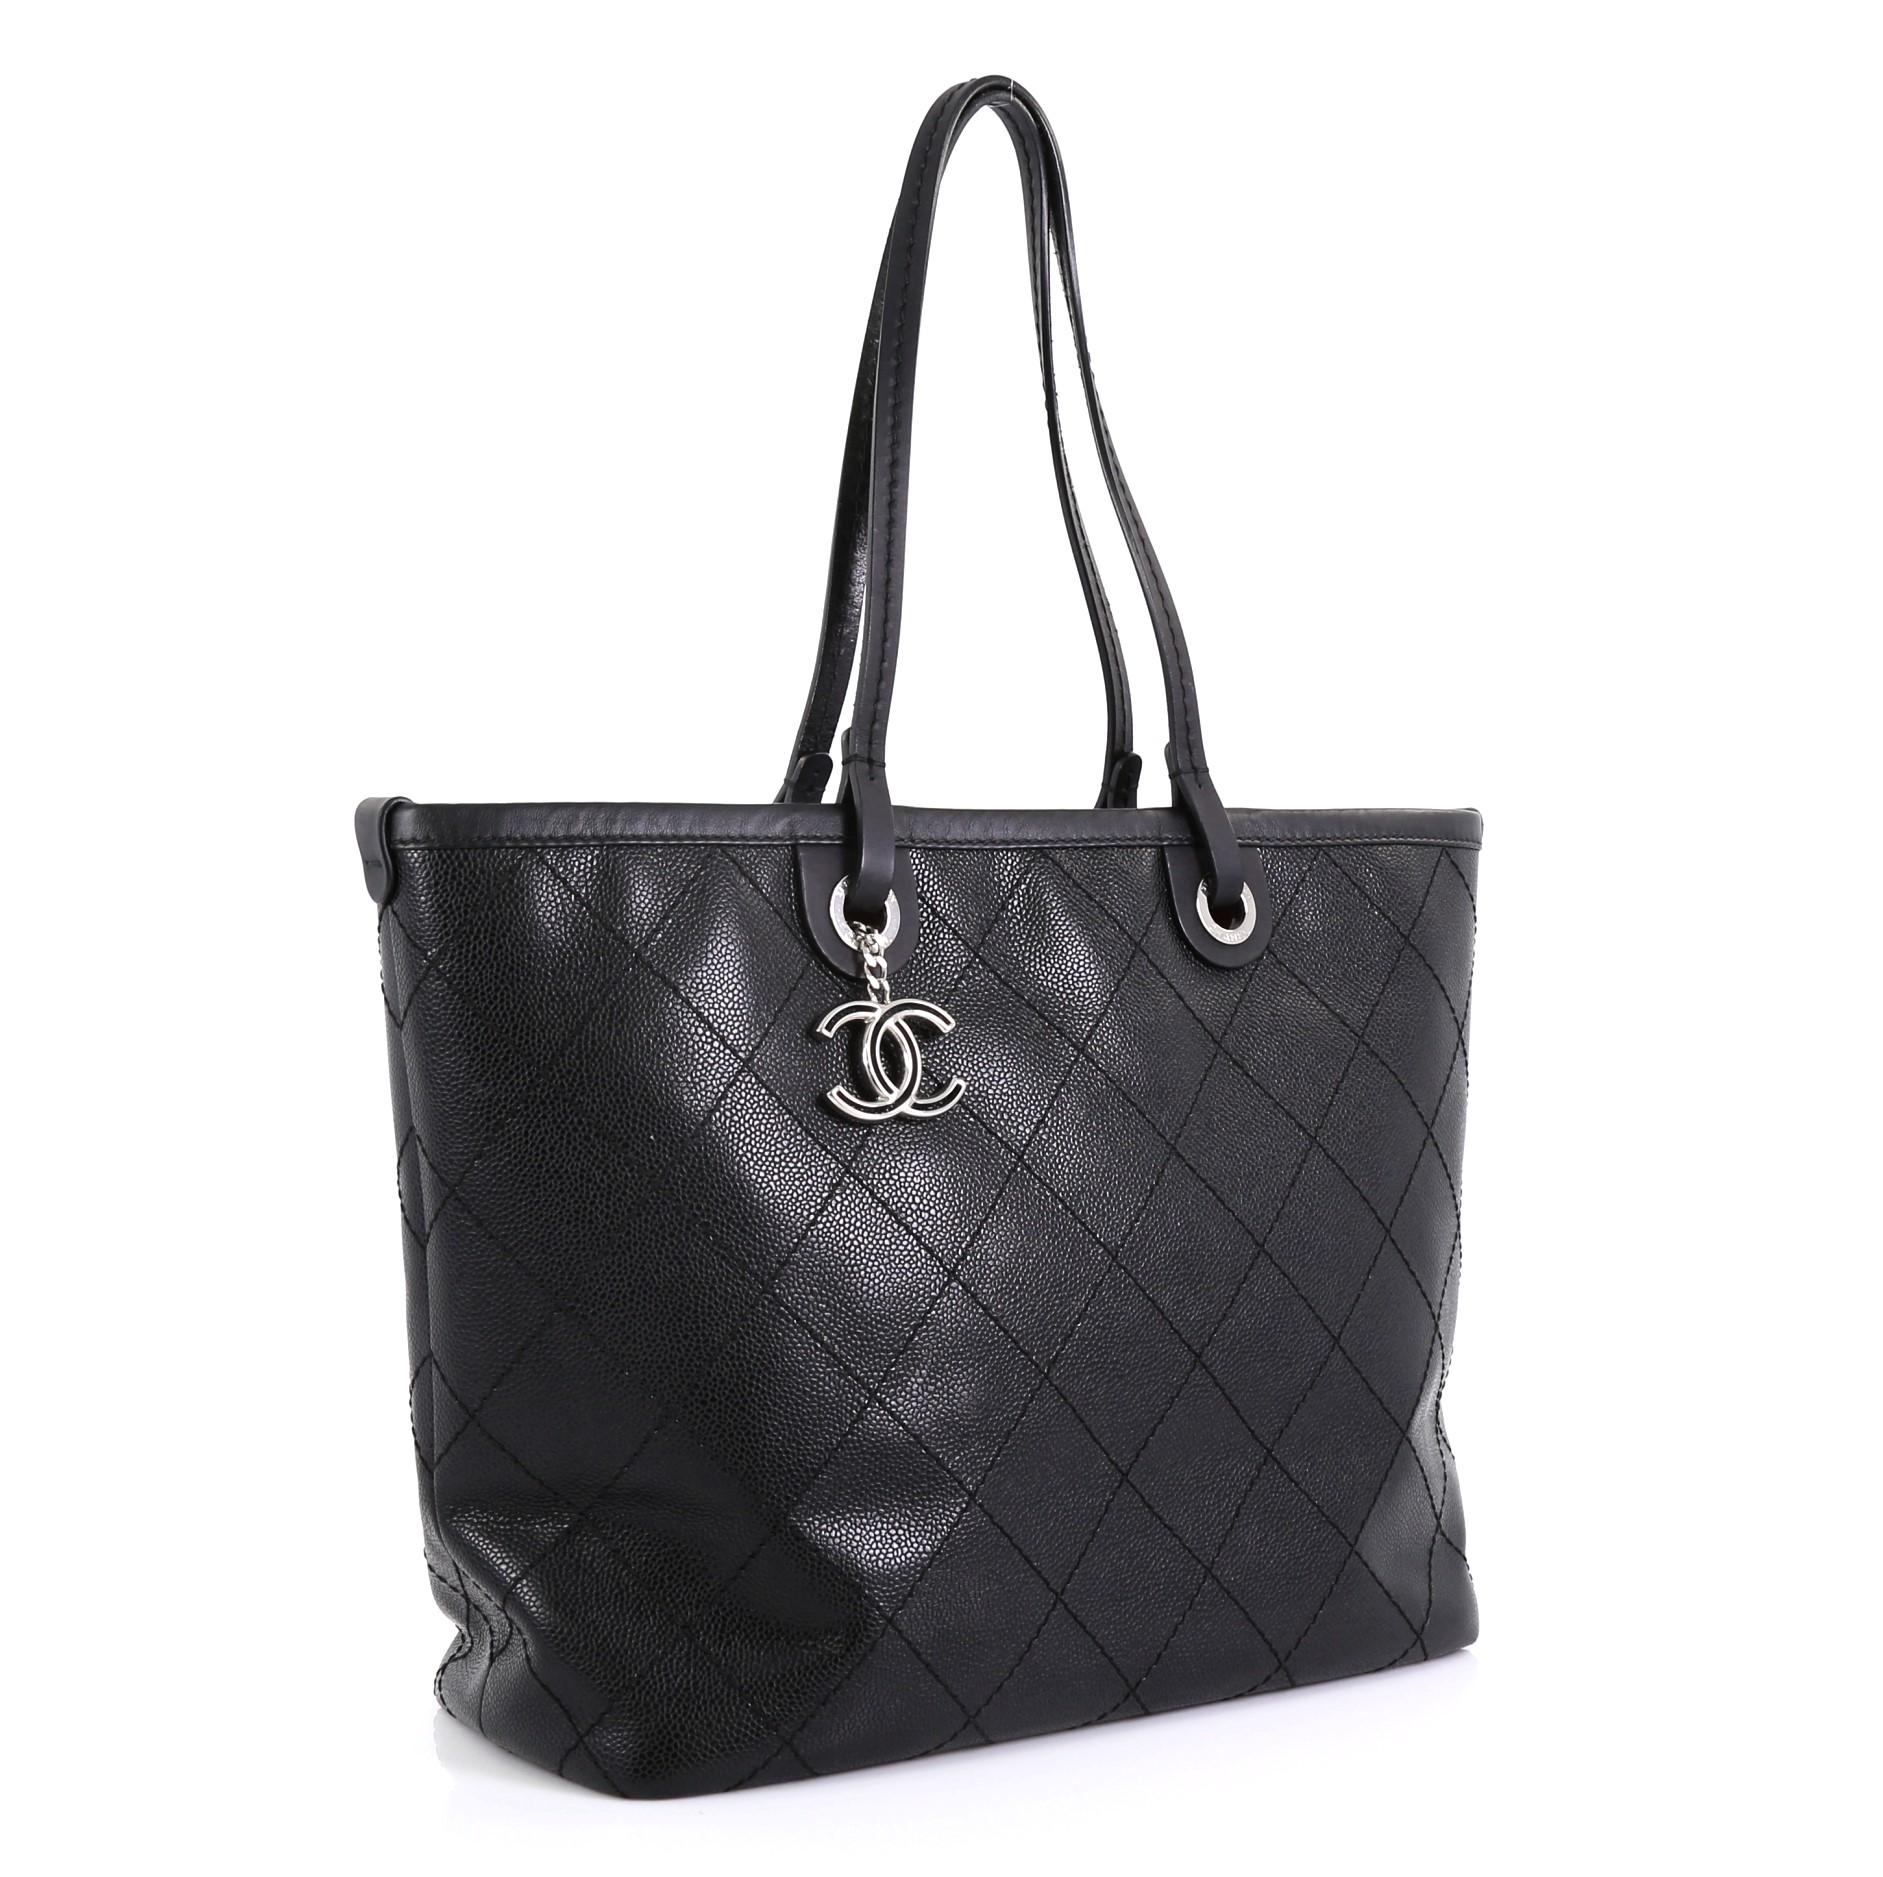 This Chanel Fever Tote Quilted Caviar Medium, crafted in black quilted caviar leather, features dual slim leather handles, CC charm, protective base studs, and silver-tone hardware. Its zip closure opens to a red fabric interior with zip and slip